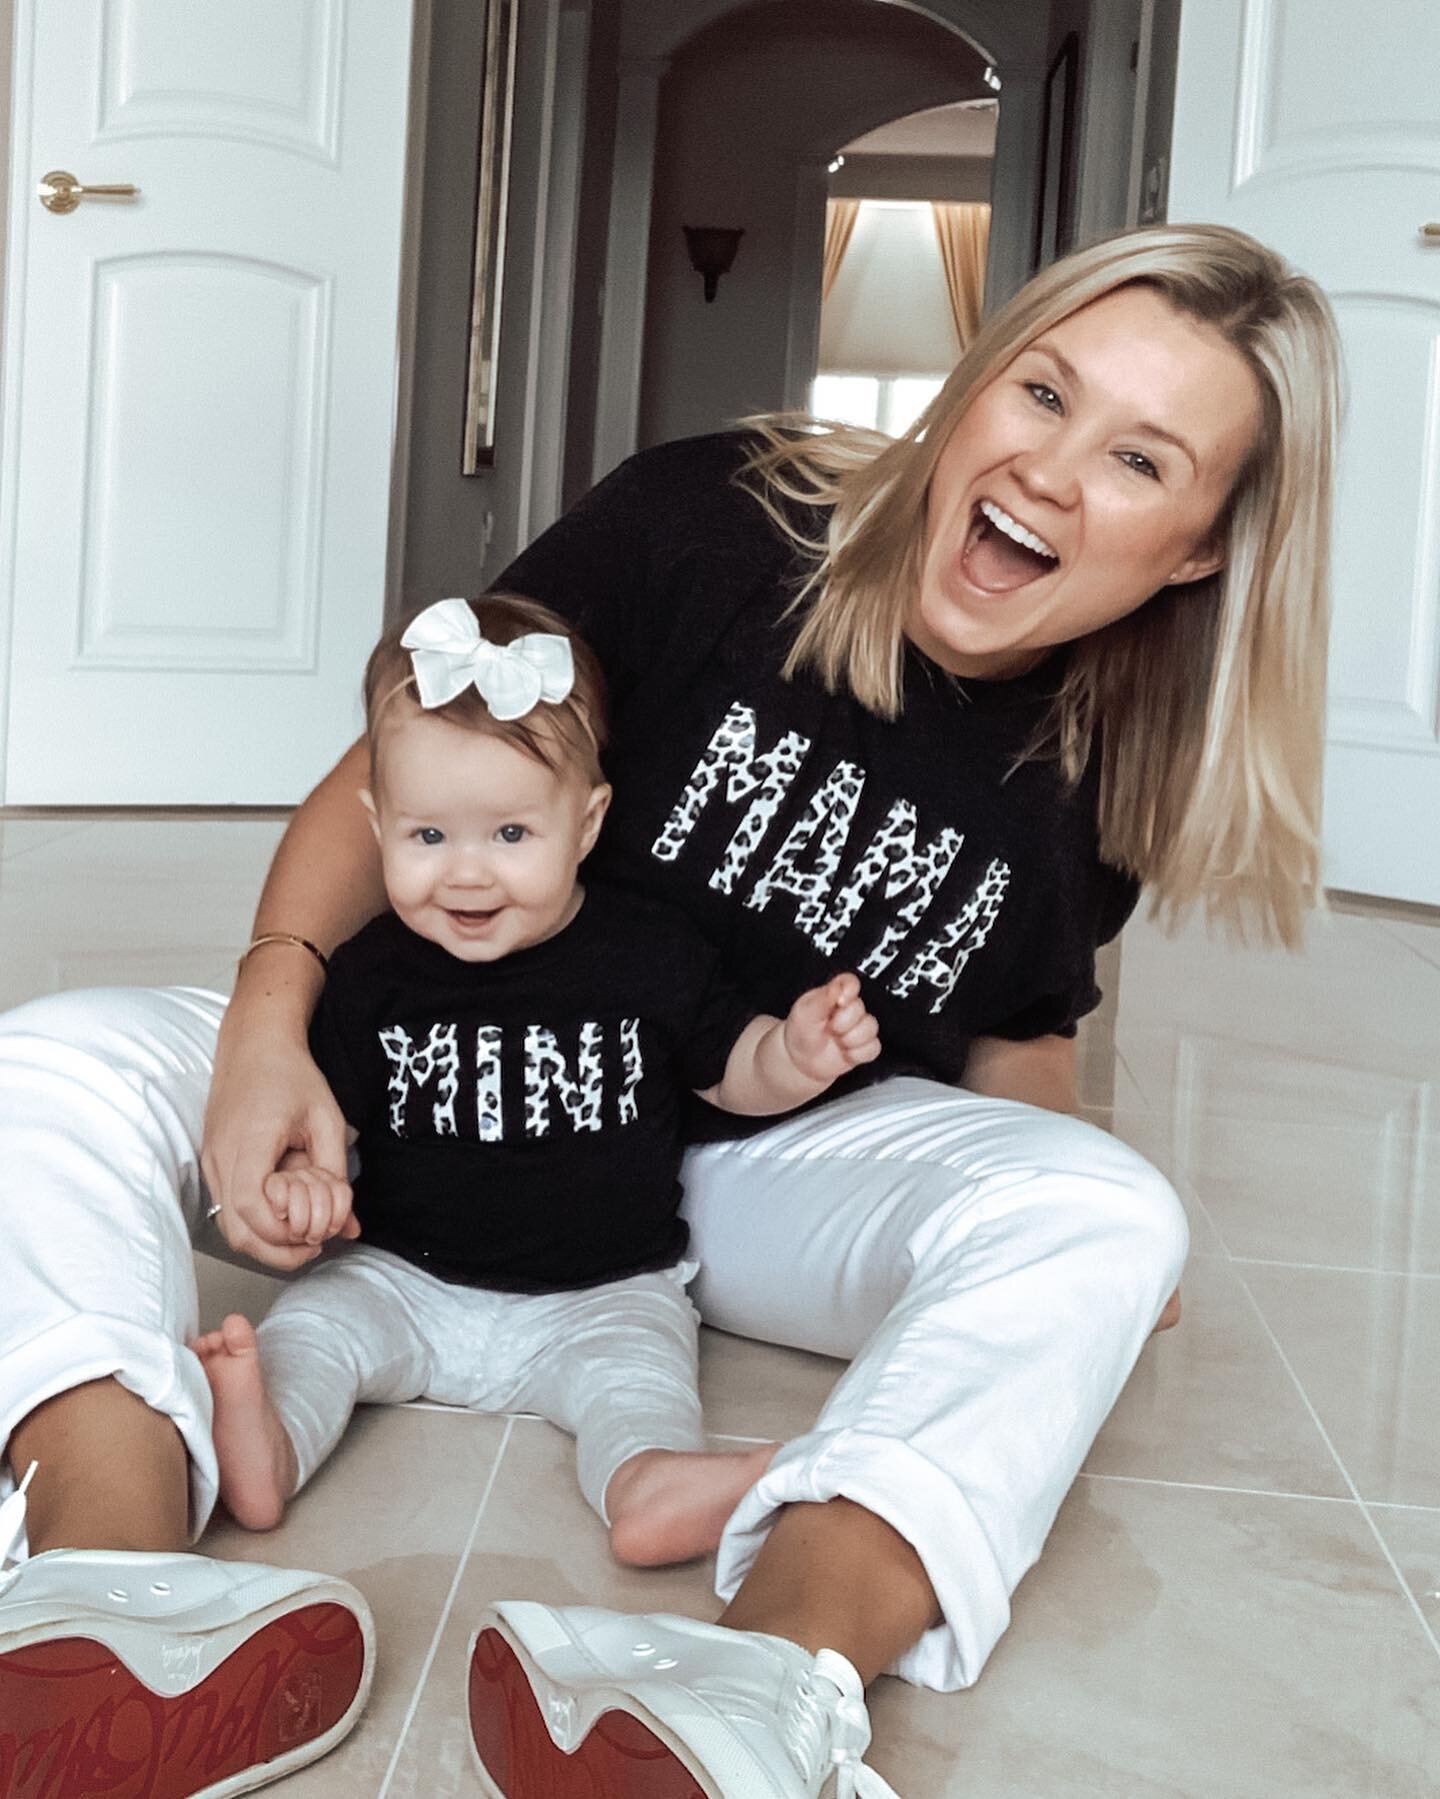 I&rsquo;m so excited to share these!! Three generations! 🥰 Huge Shoutout to @leanderboutique  for the most adorable shirts, if you are looking for custom orders, she is your girl!! 🤍
&bull;
&bull;
&bull;
&bull;
&bull;
#sippnsunshine #motherdaughter